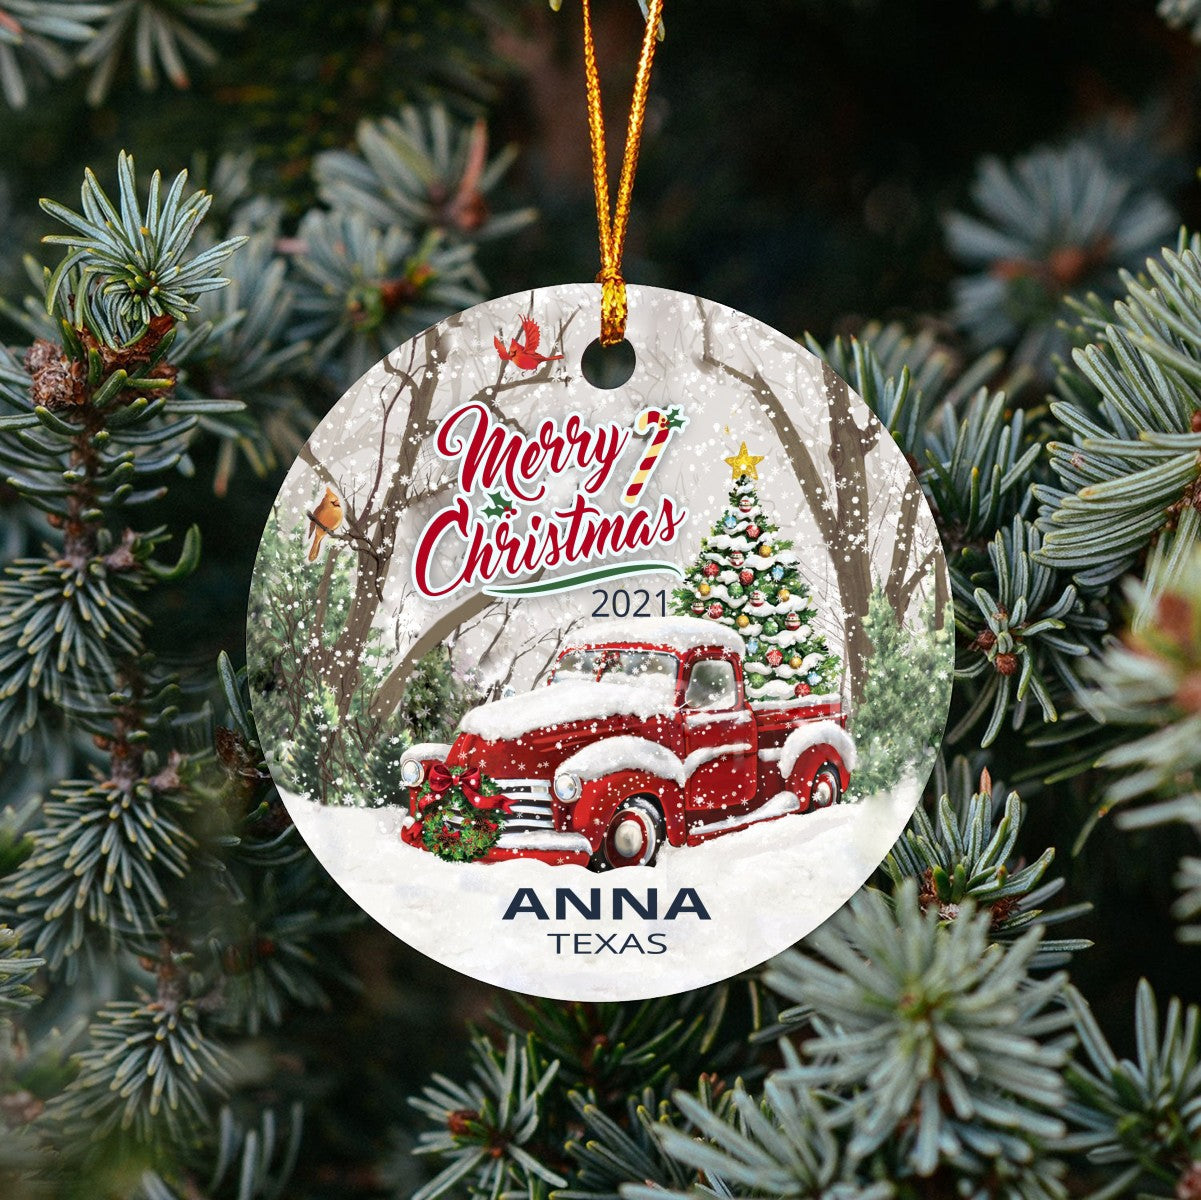 Christmas Tree Ornaments Anna - Ornament With Name City, State Anna Texas TX Ornament - Red Truck Xmas Ornaments 3'' Plastic Gift For Family, Friend And Housewarming